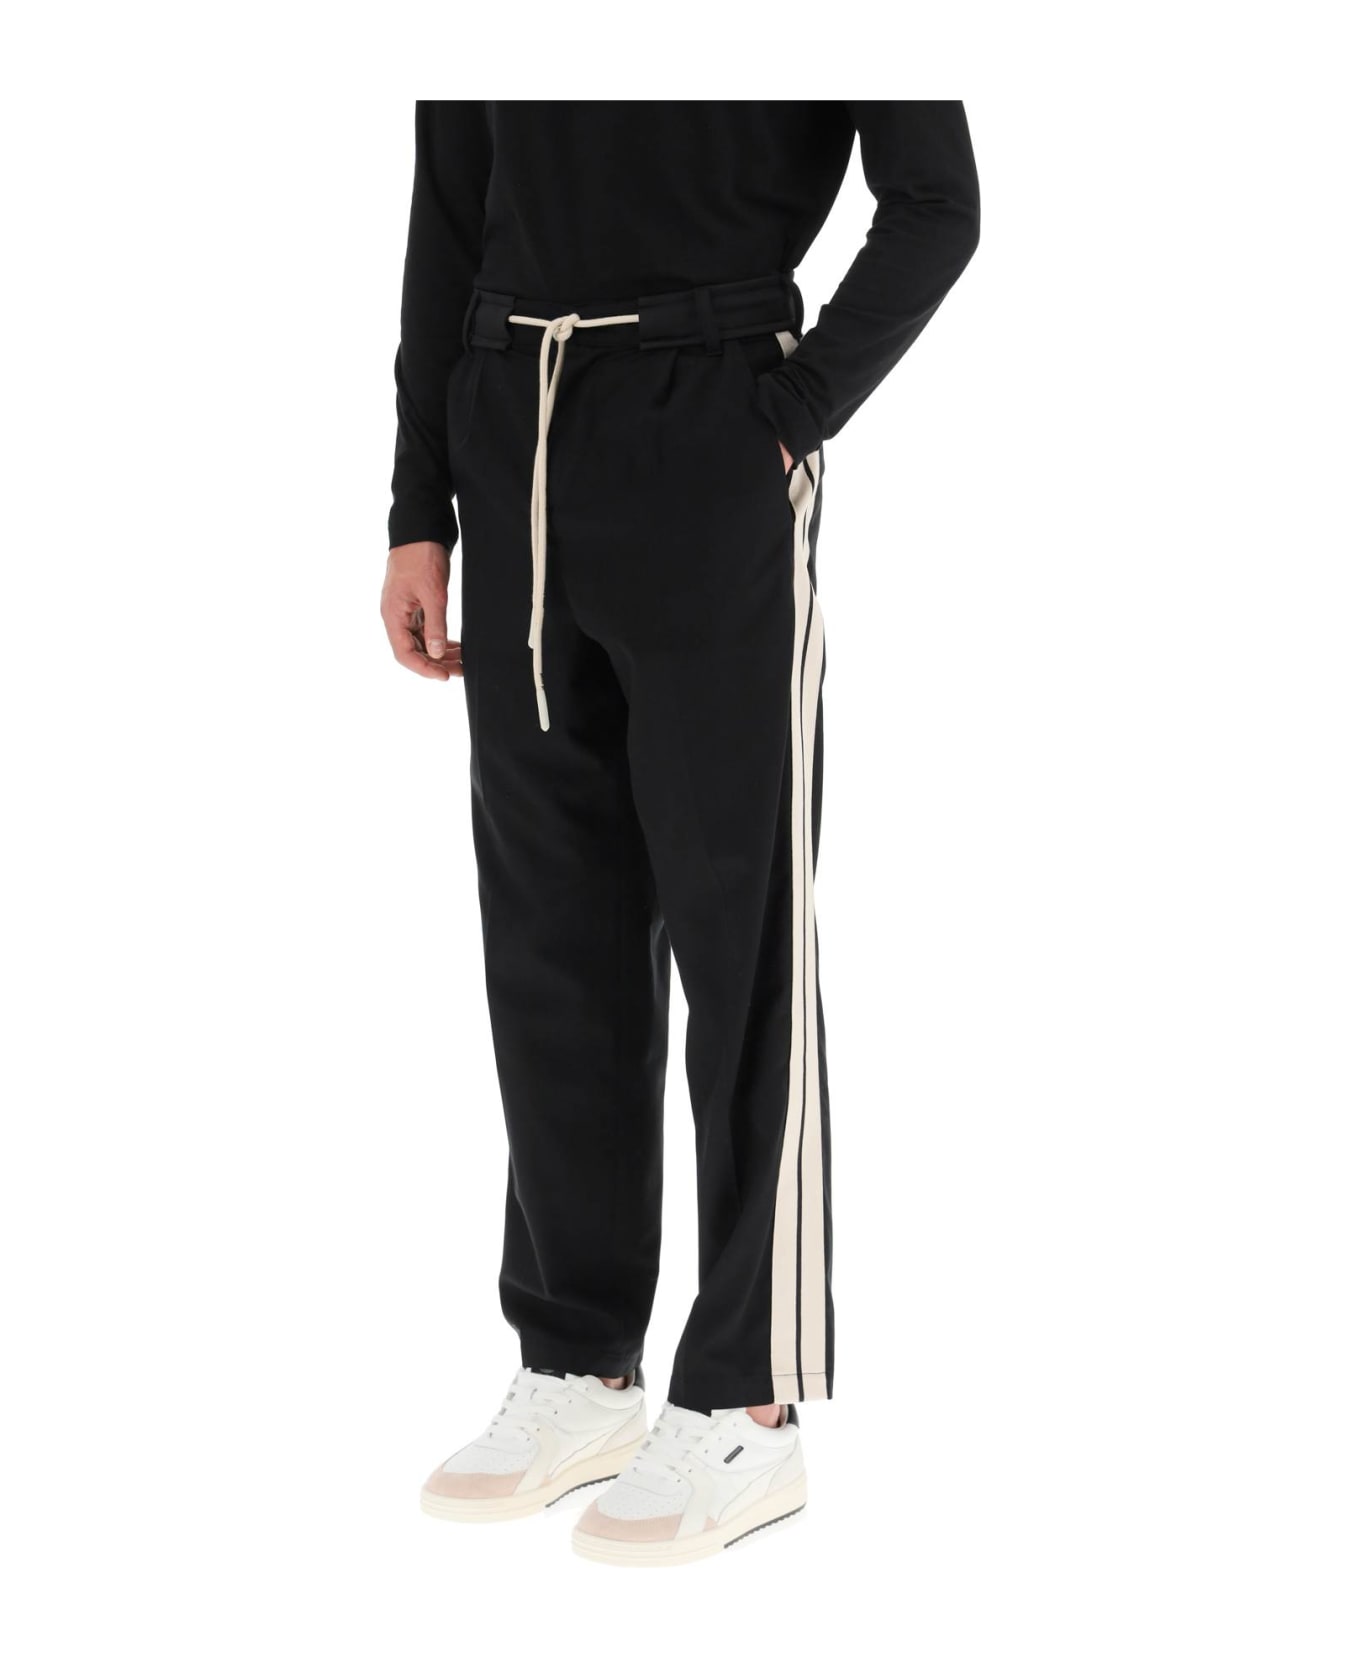 Palm Angels Drawstring Cotton Pants With Side Bands - BLACK BLACK (Black) ボトムス